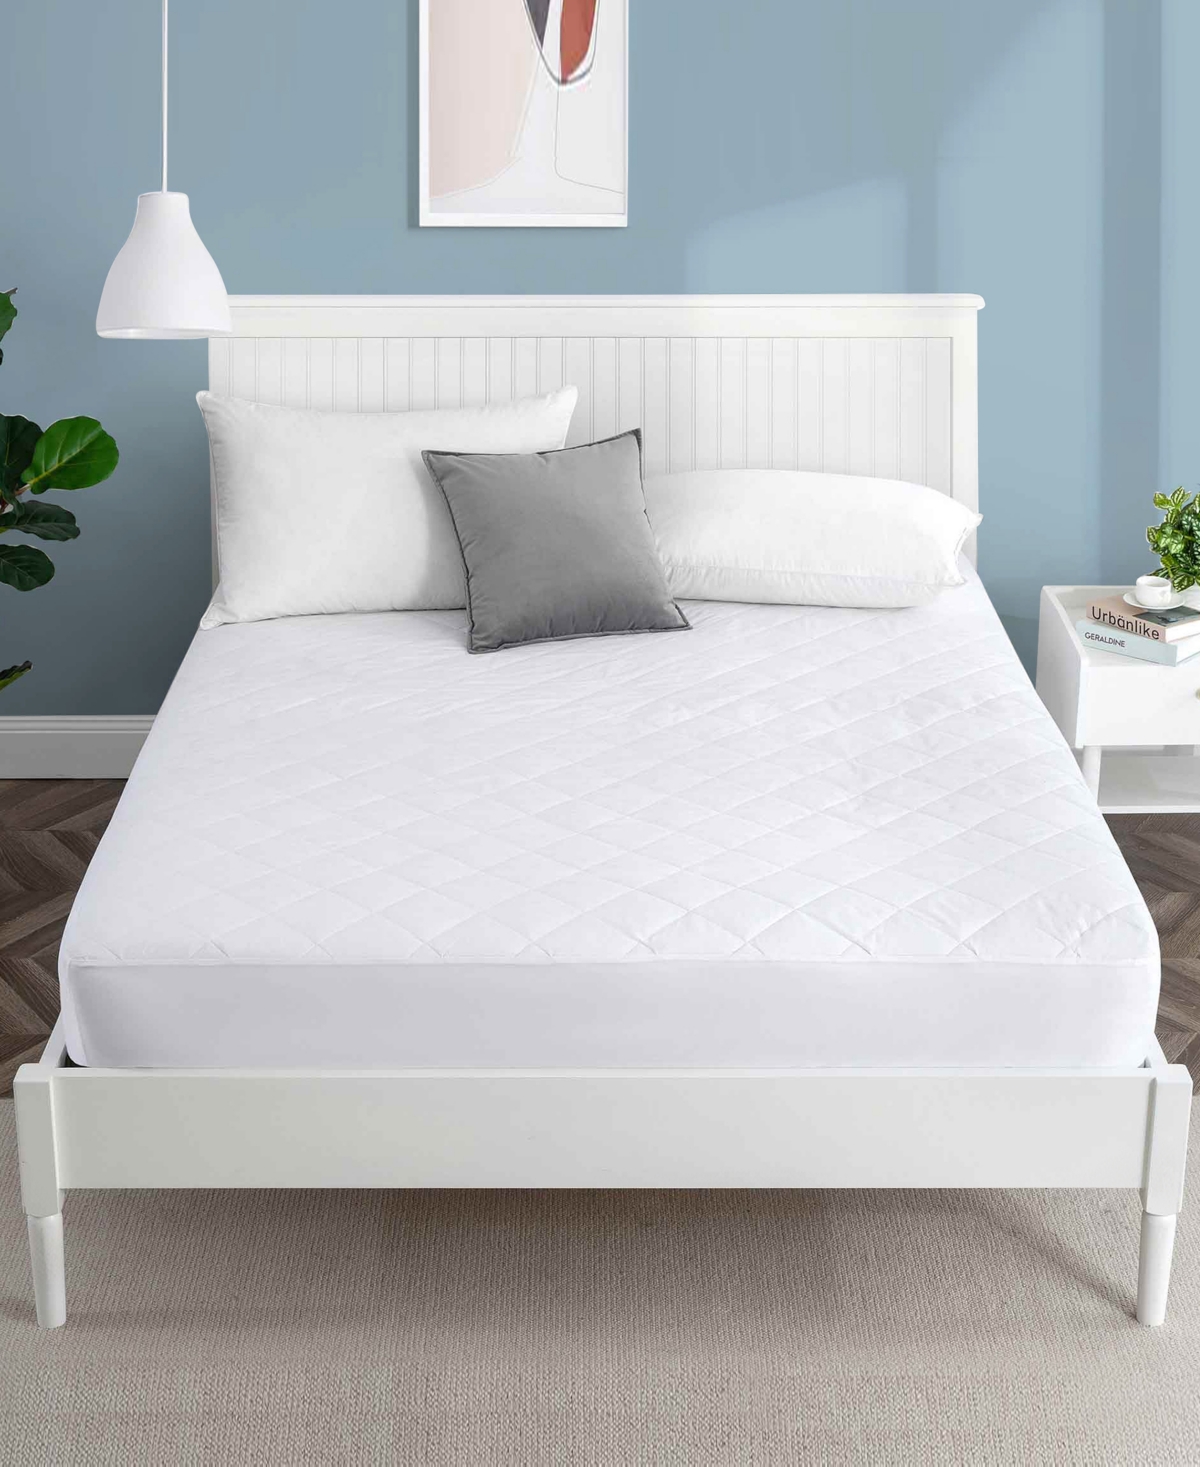 Unikome Breathable Cotton Square Quilted Fitted Mattress Pad, Queen In White